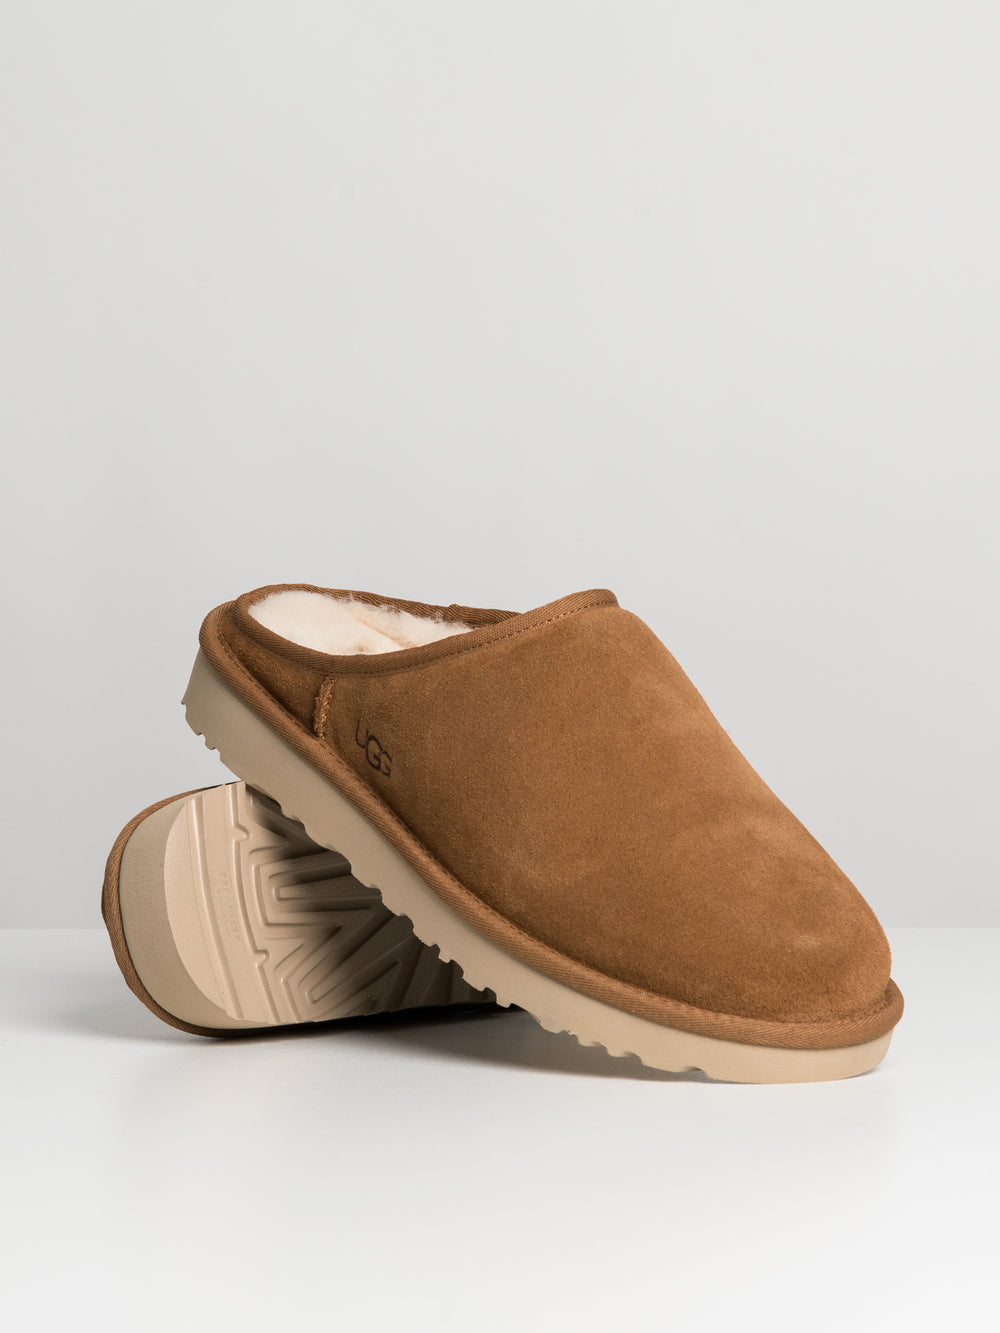 MENS UGG CLASSIC SLIP ON - CLEARANCE